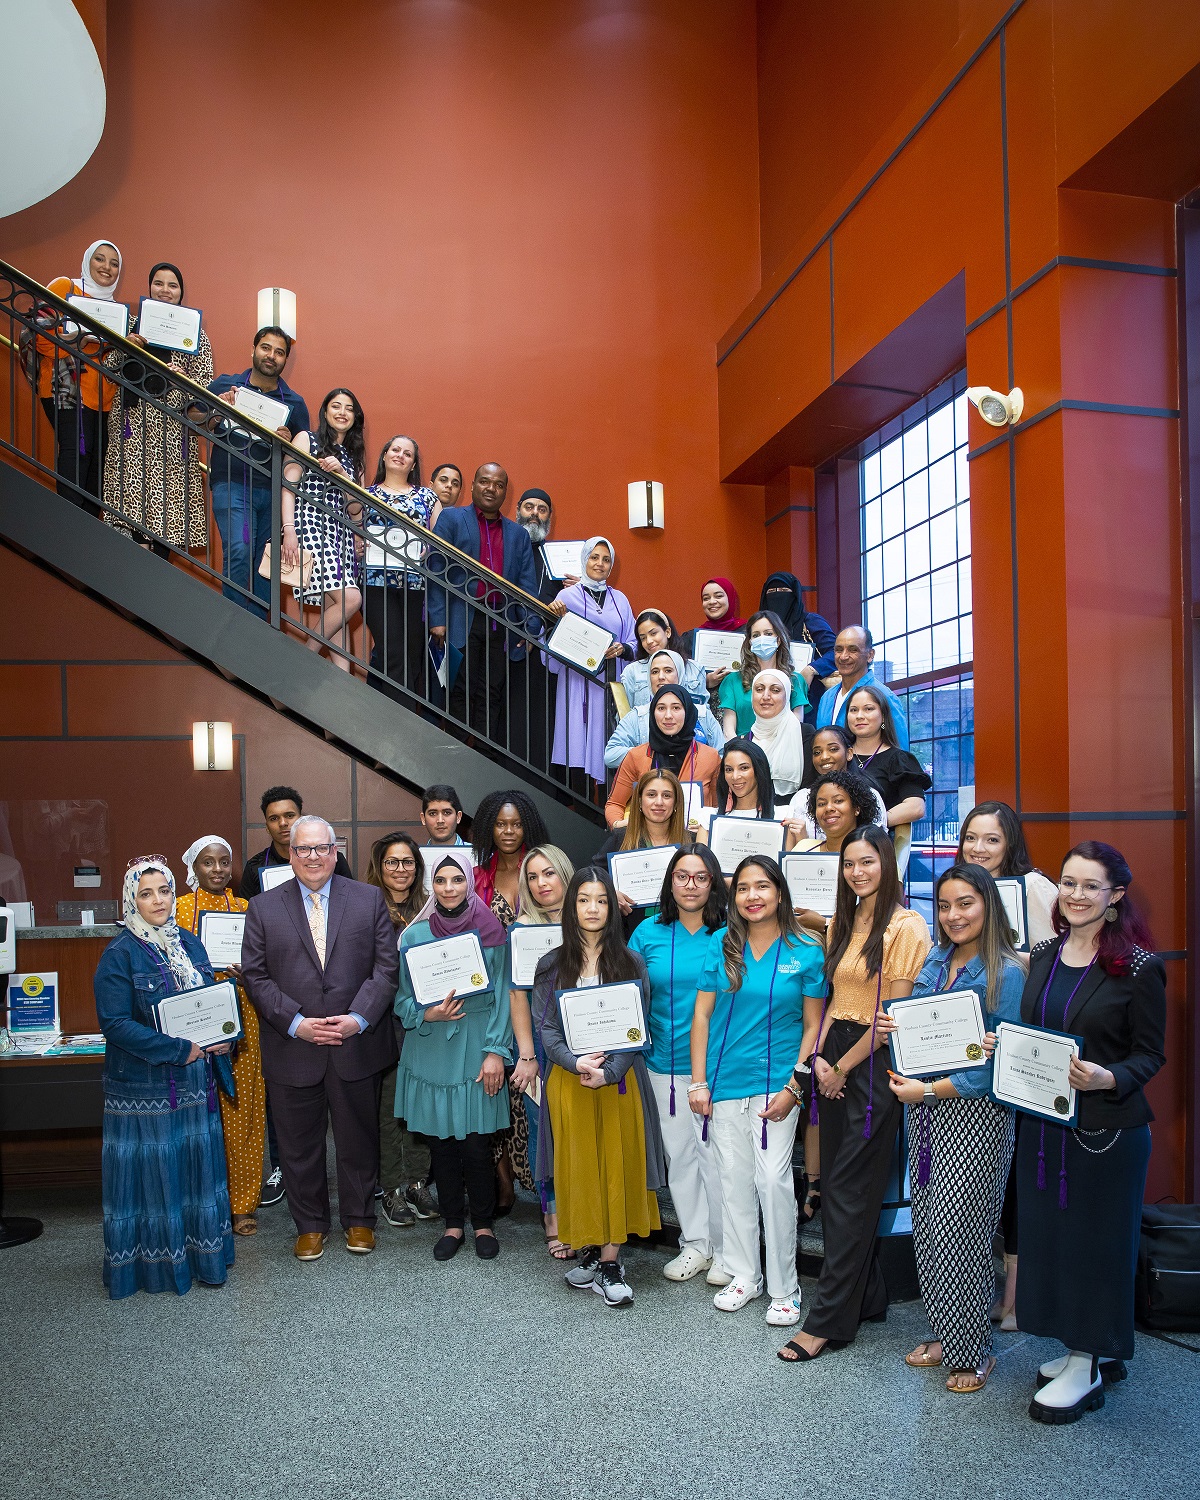 Hudson County Community College honored graduating students from the Classes of 2020-22 who began their journeys in Hudson’s ESL Program during the “ESL to Graduation: A Celebration” event.